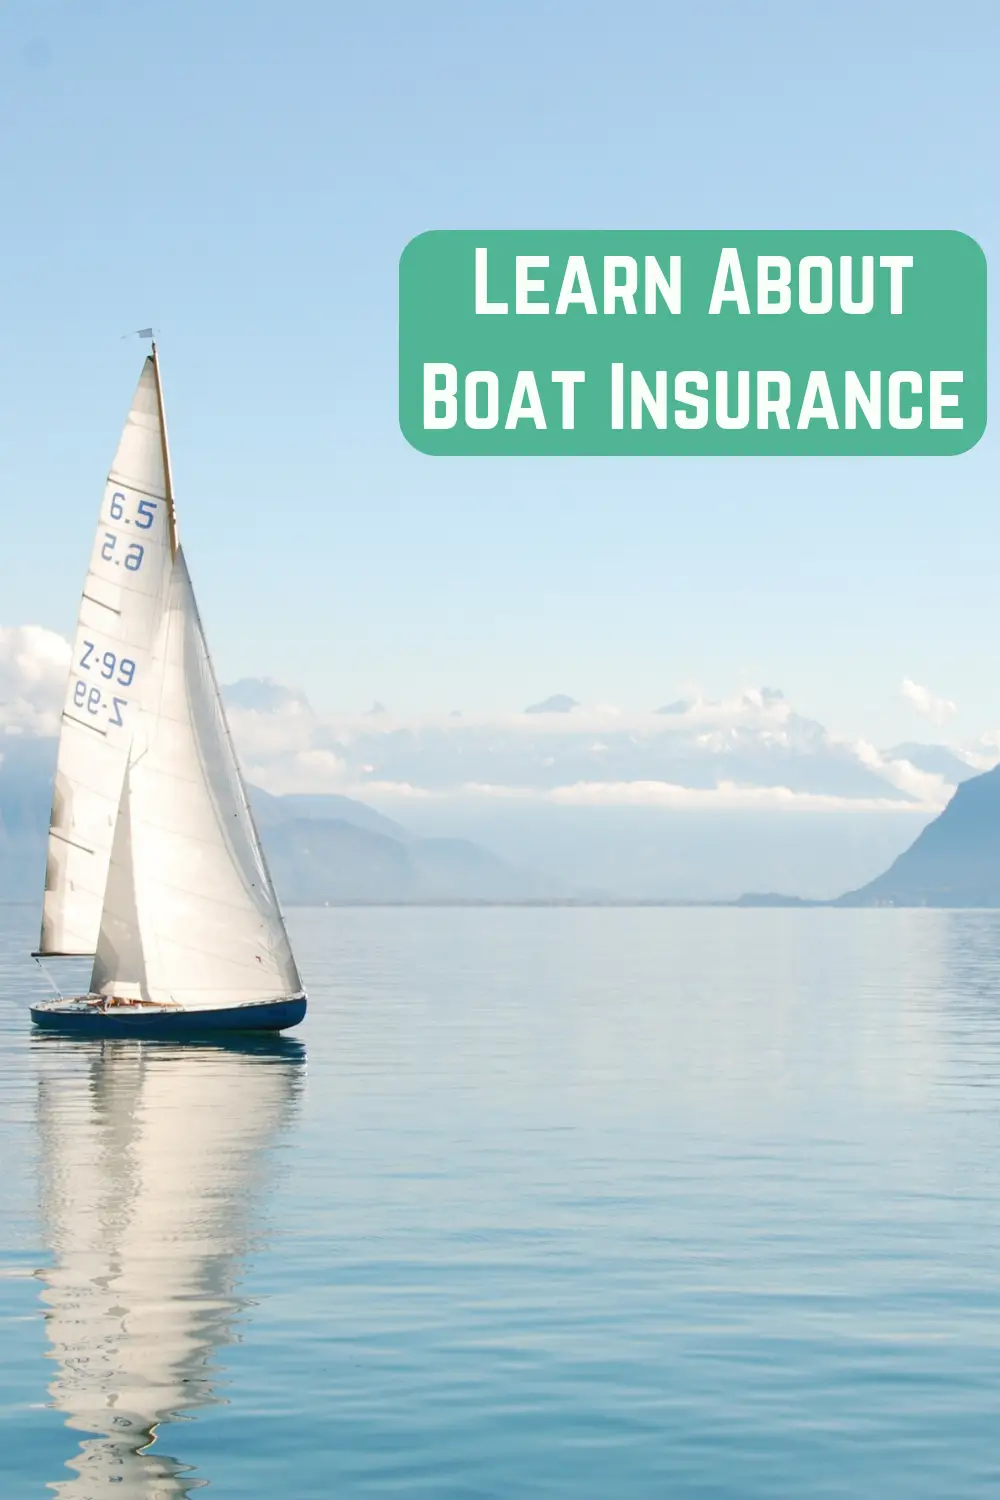 Helpful resources to find the best boat insurance